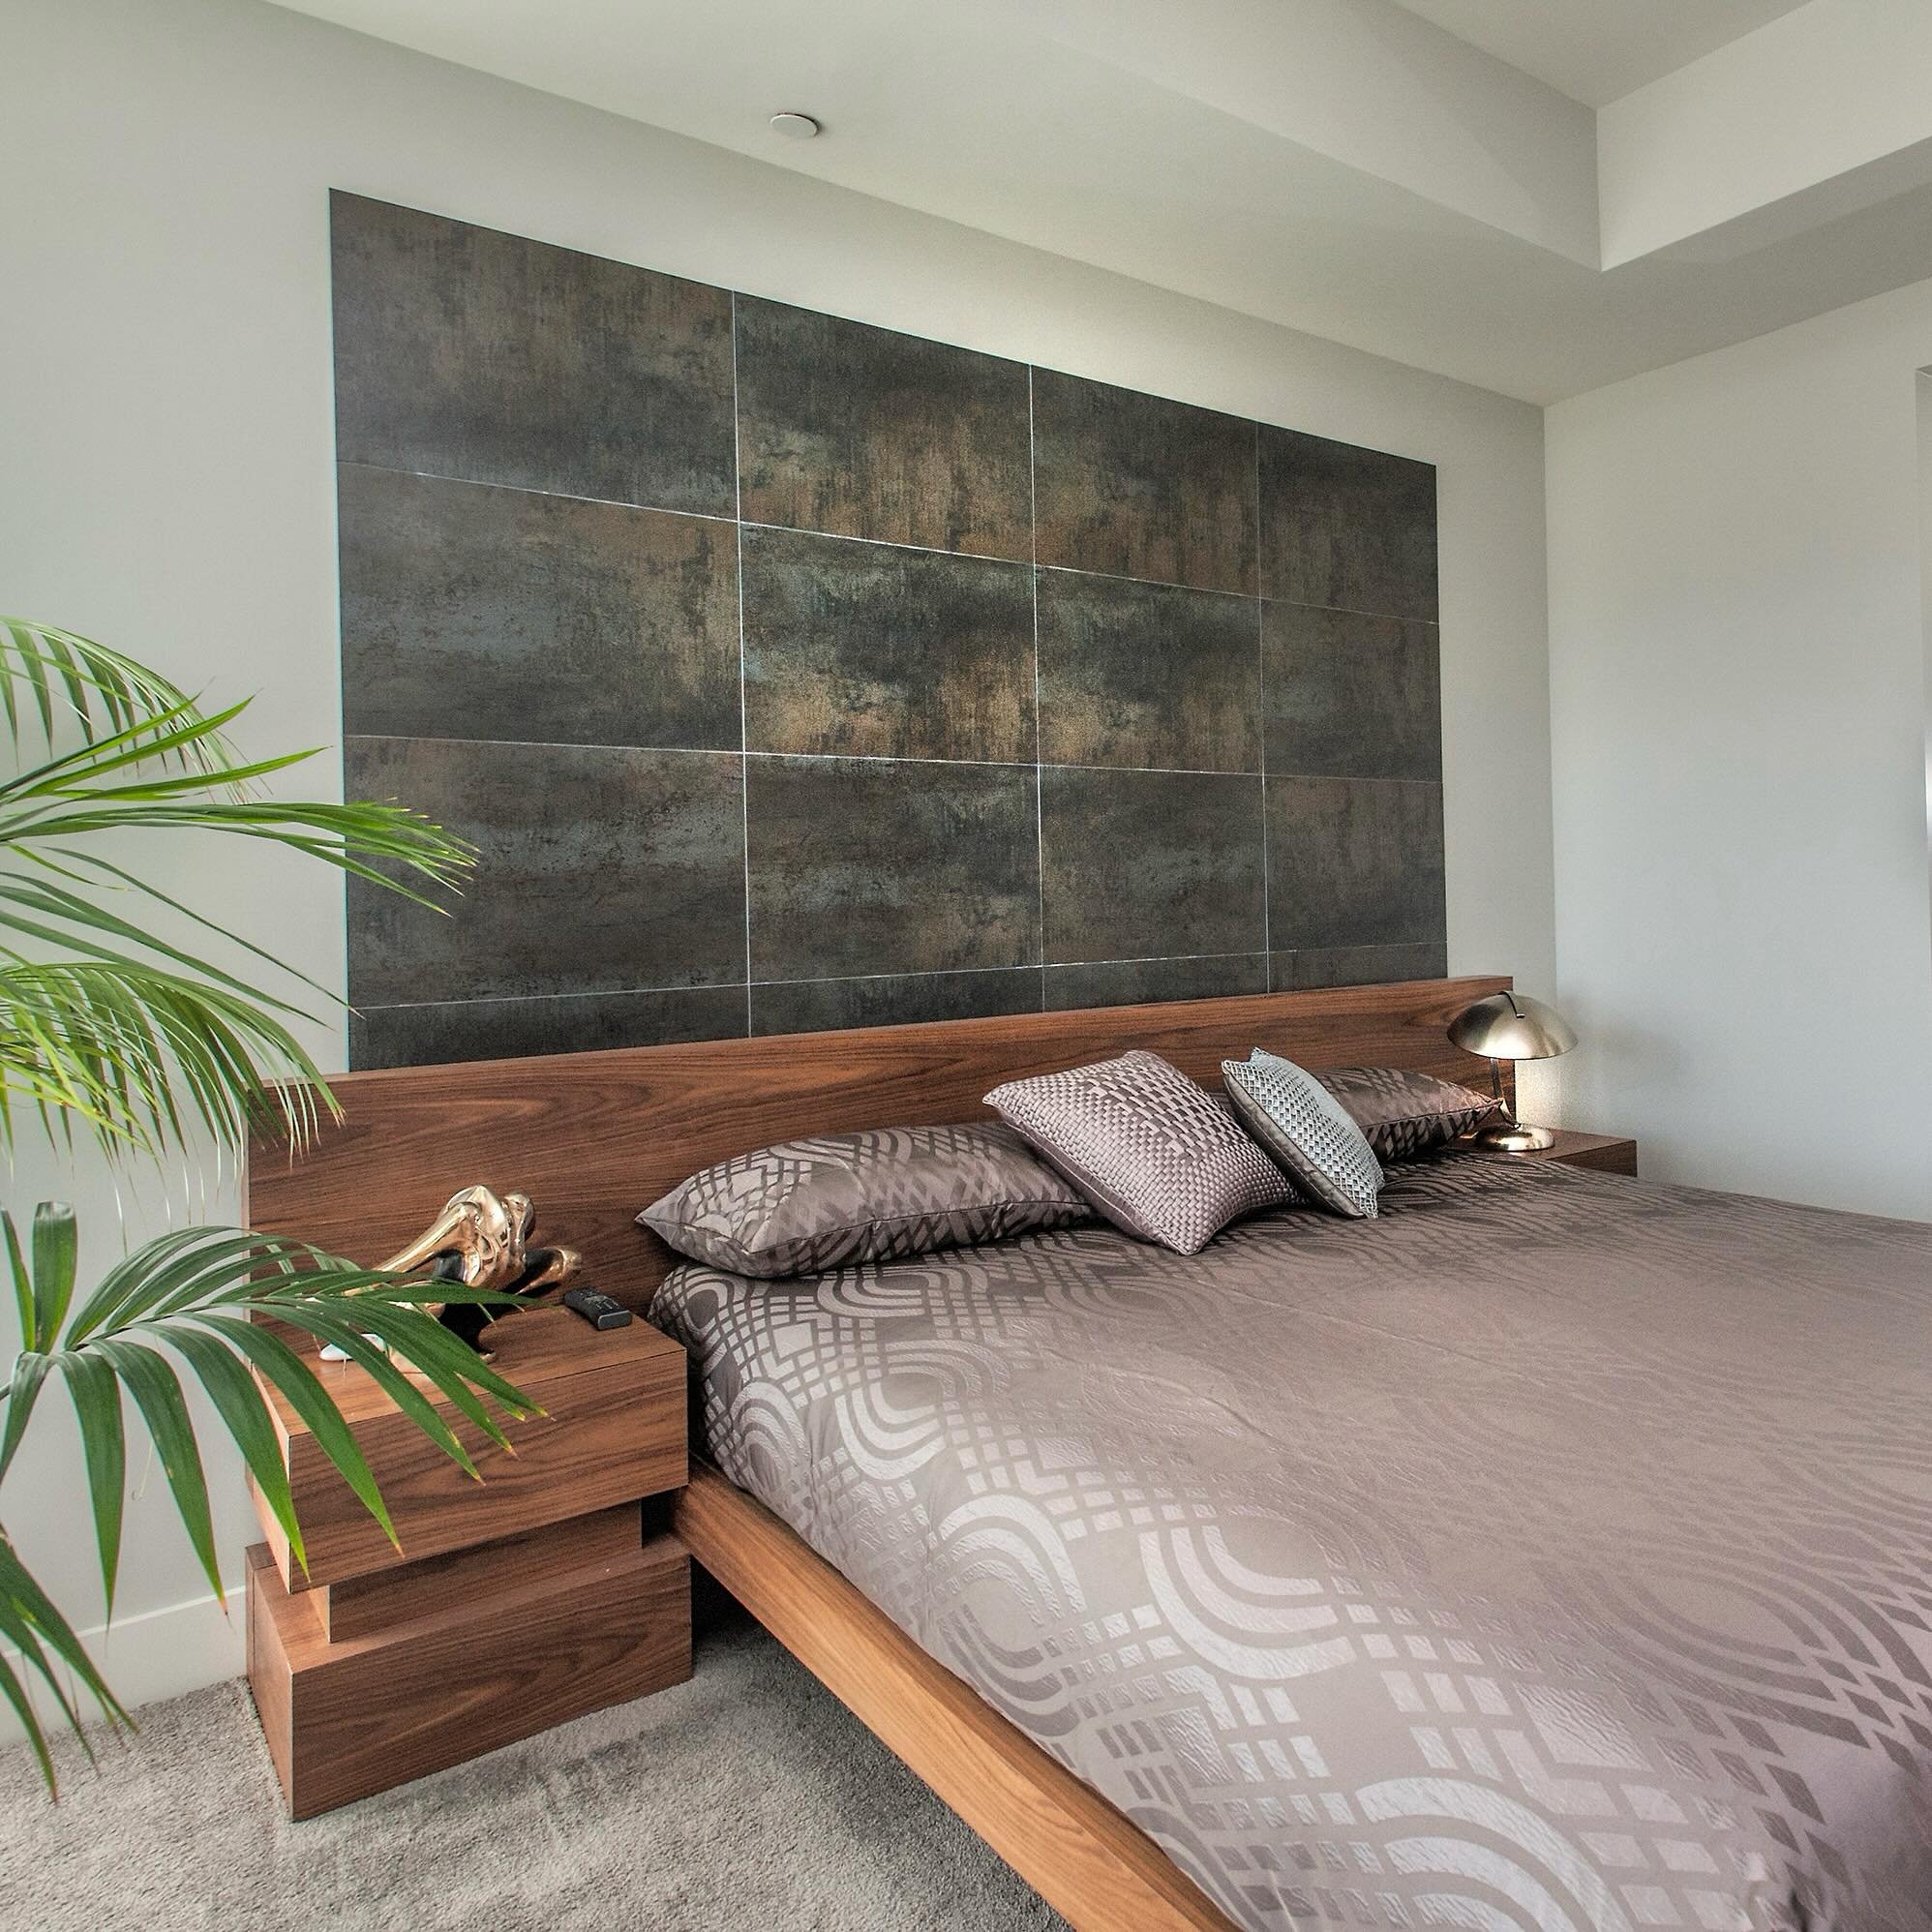 Nothing commands attention in a room like a tiled accent wall acting like an extension of the headboard. It acts as a focal point while everything else complements the look of the space.